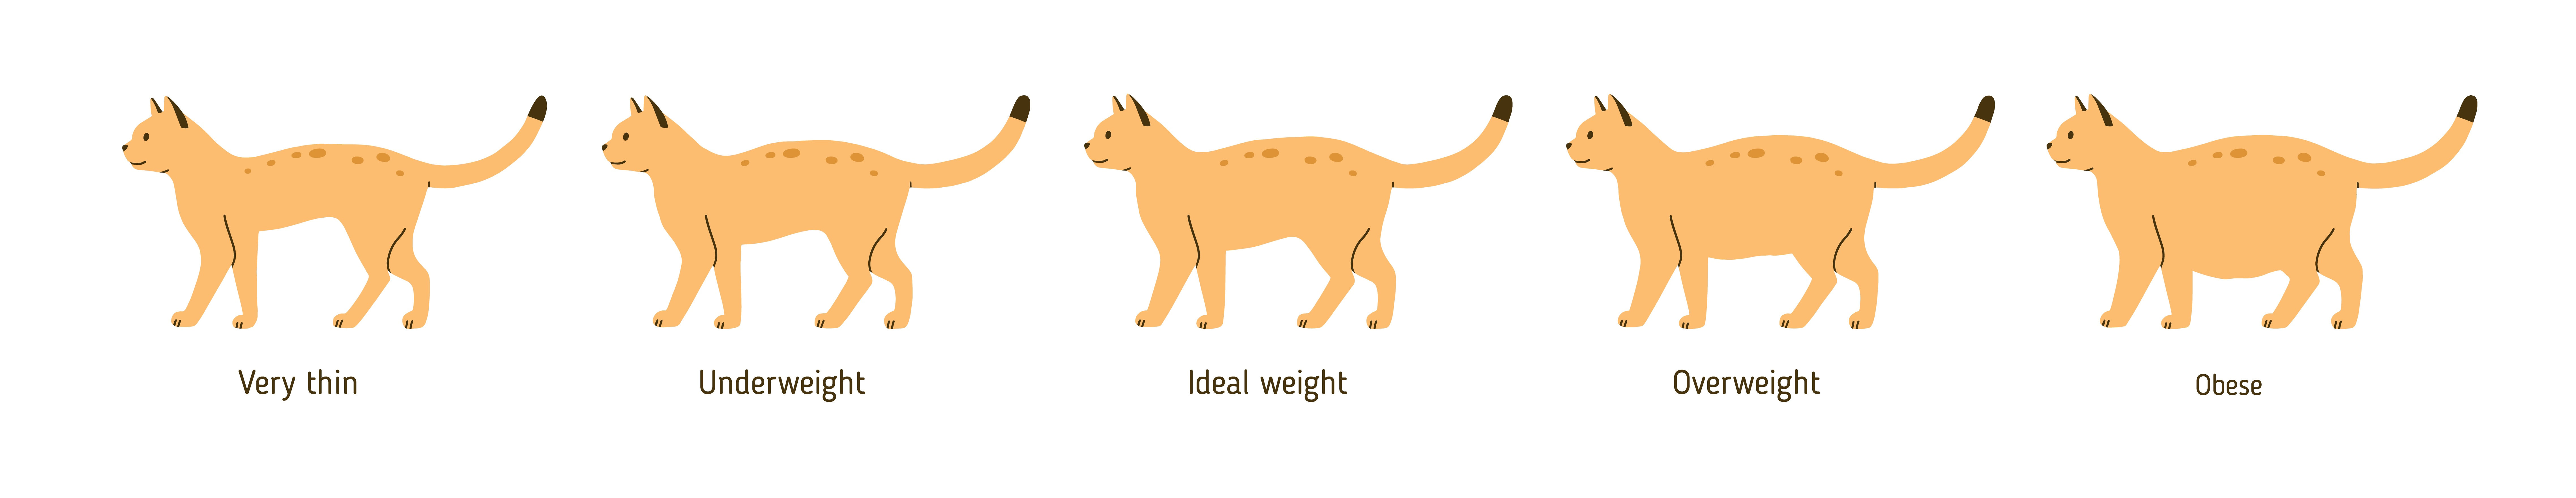 Overweight cat chart, Rock Hill Specialist & Emergency Vets